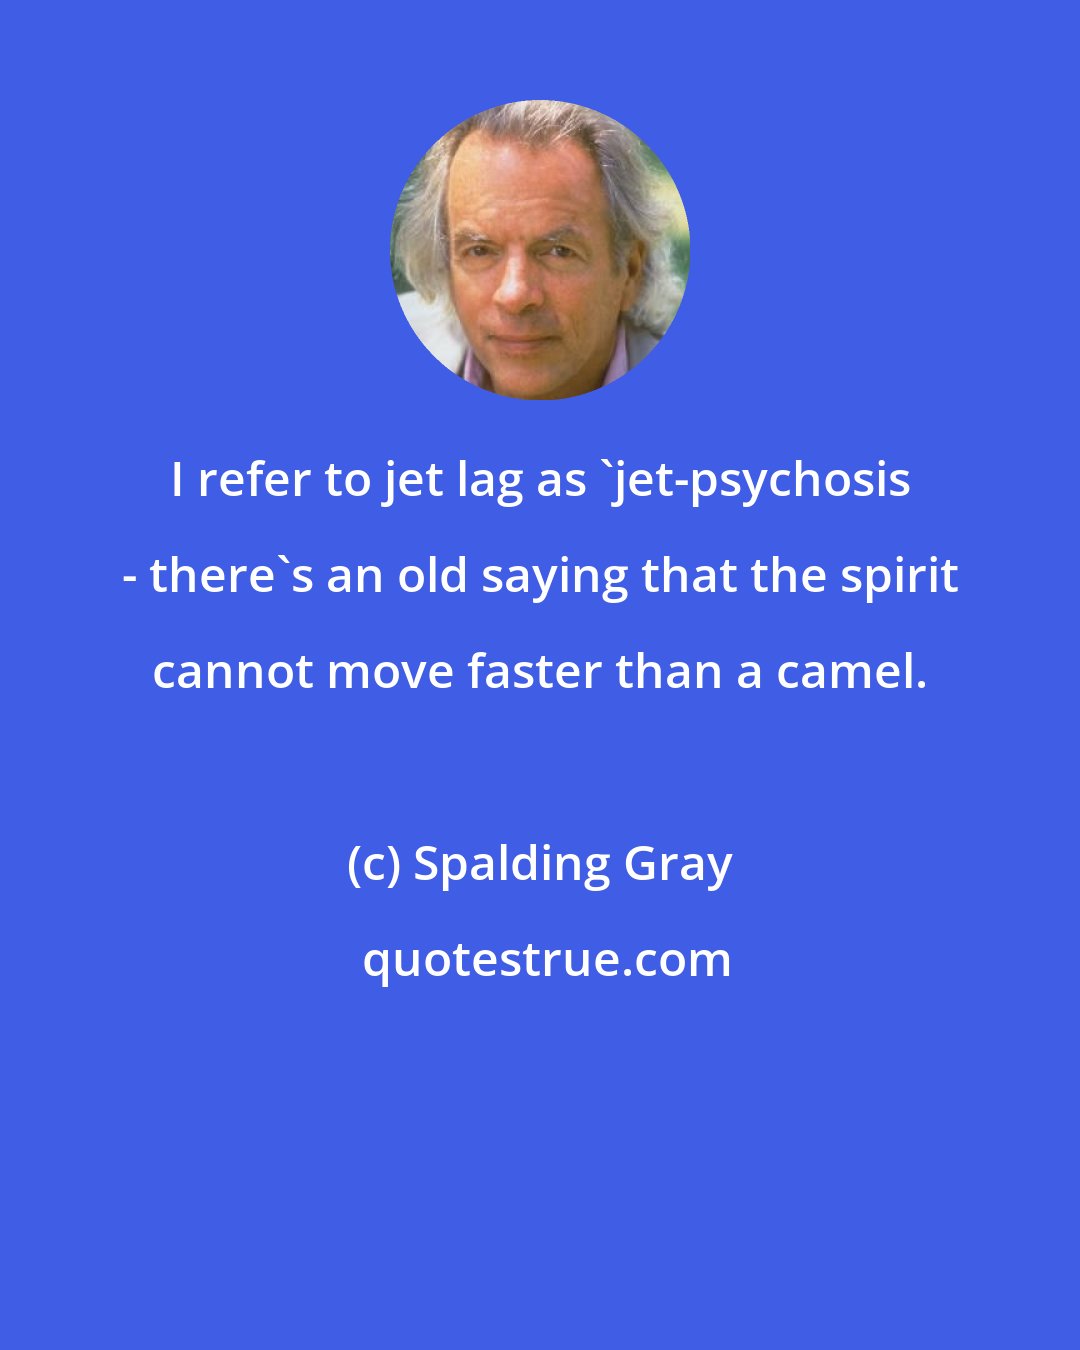 Spalding Gray: I refer to jet lag as 'jet-psychosis - there's an old saying that the spirit cannot move faster than a camel.